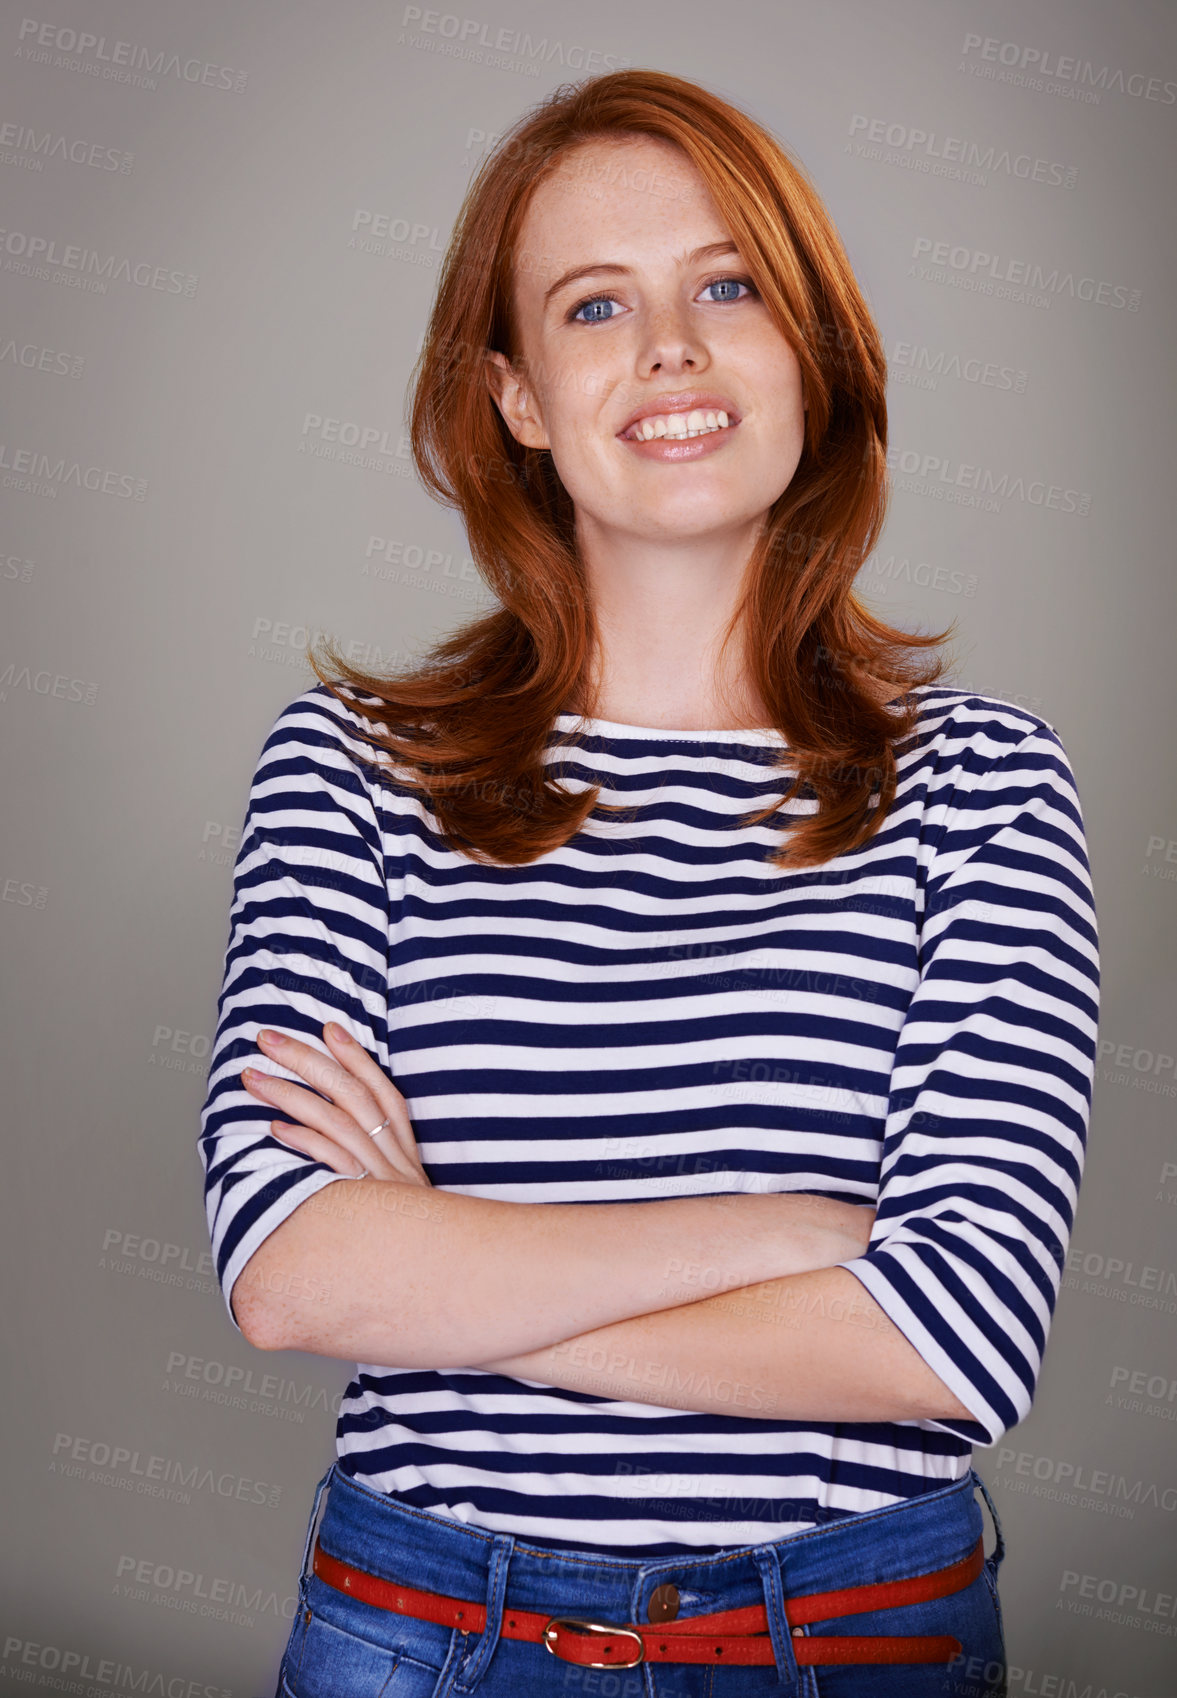 Buy stock photo Studio portrait of an attractive woman against a gray background